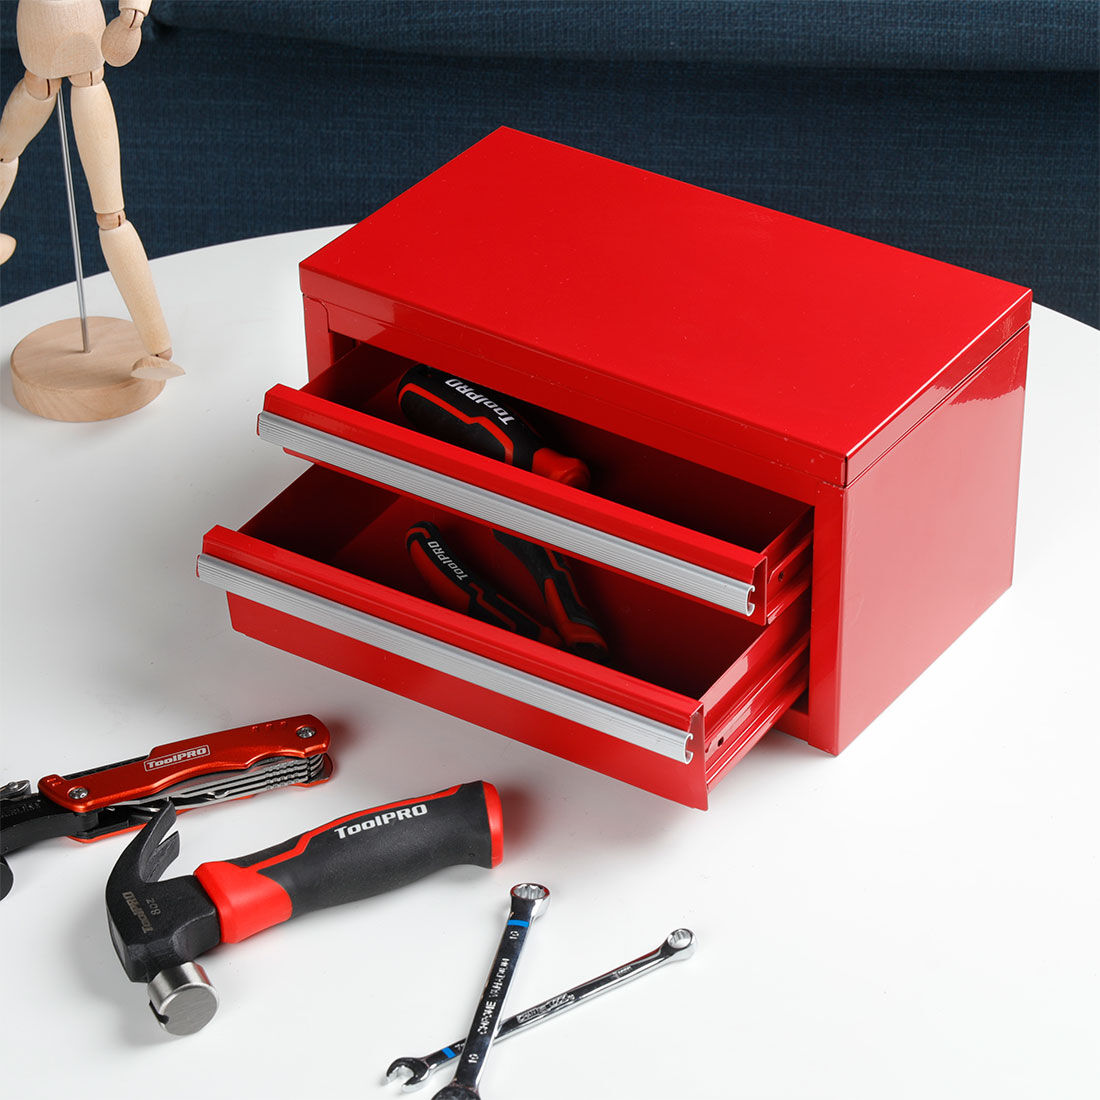 ToolPRO Miniature Tool Chest 2 Drawer Red